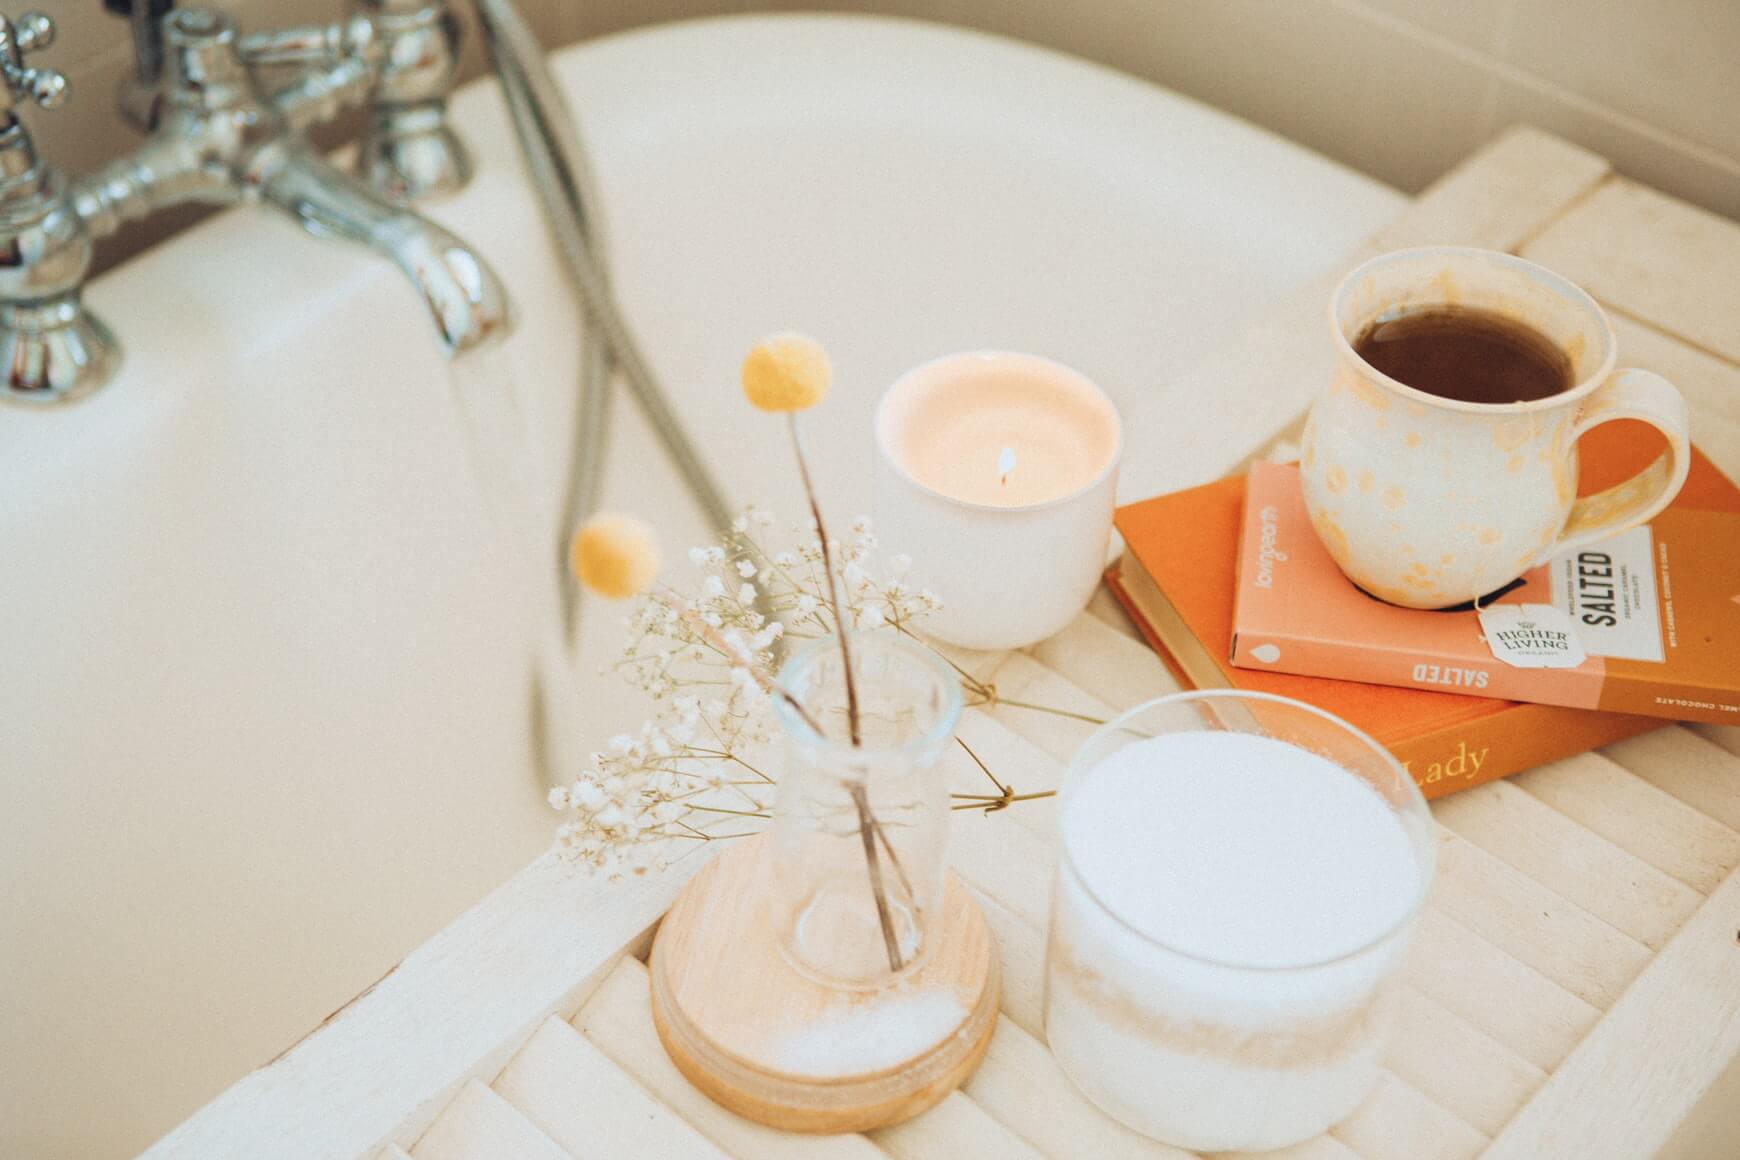 a close up image of a bath with a tray over it with a candle to help you sleep better